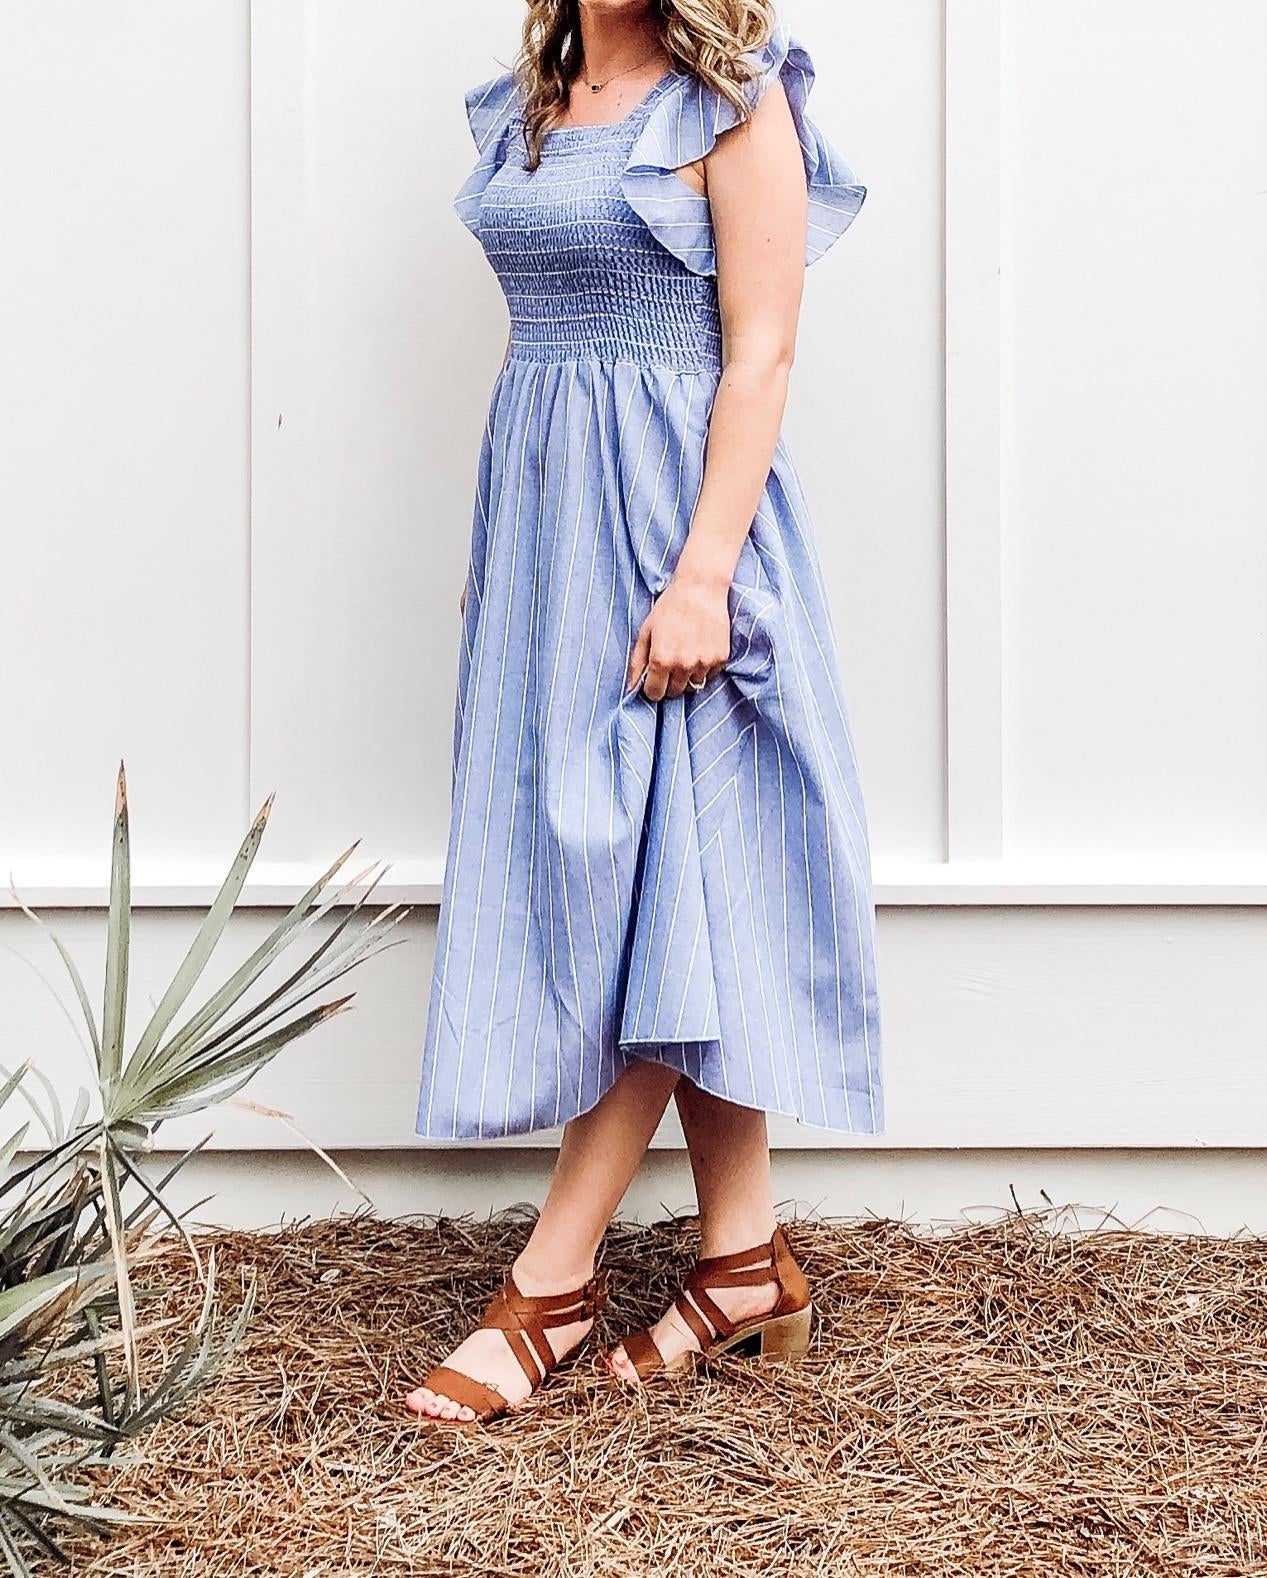 Summer dresses on your mind? Try this long cotton dress and other styl